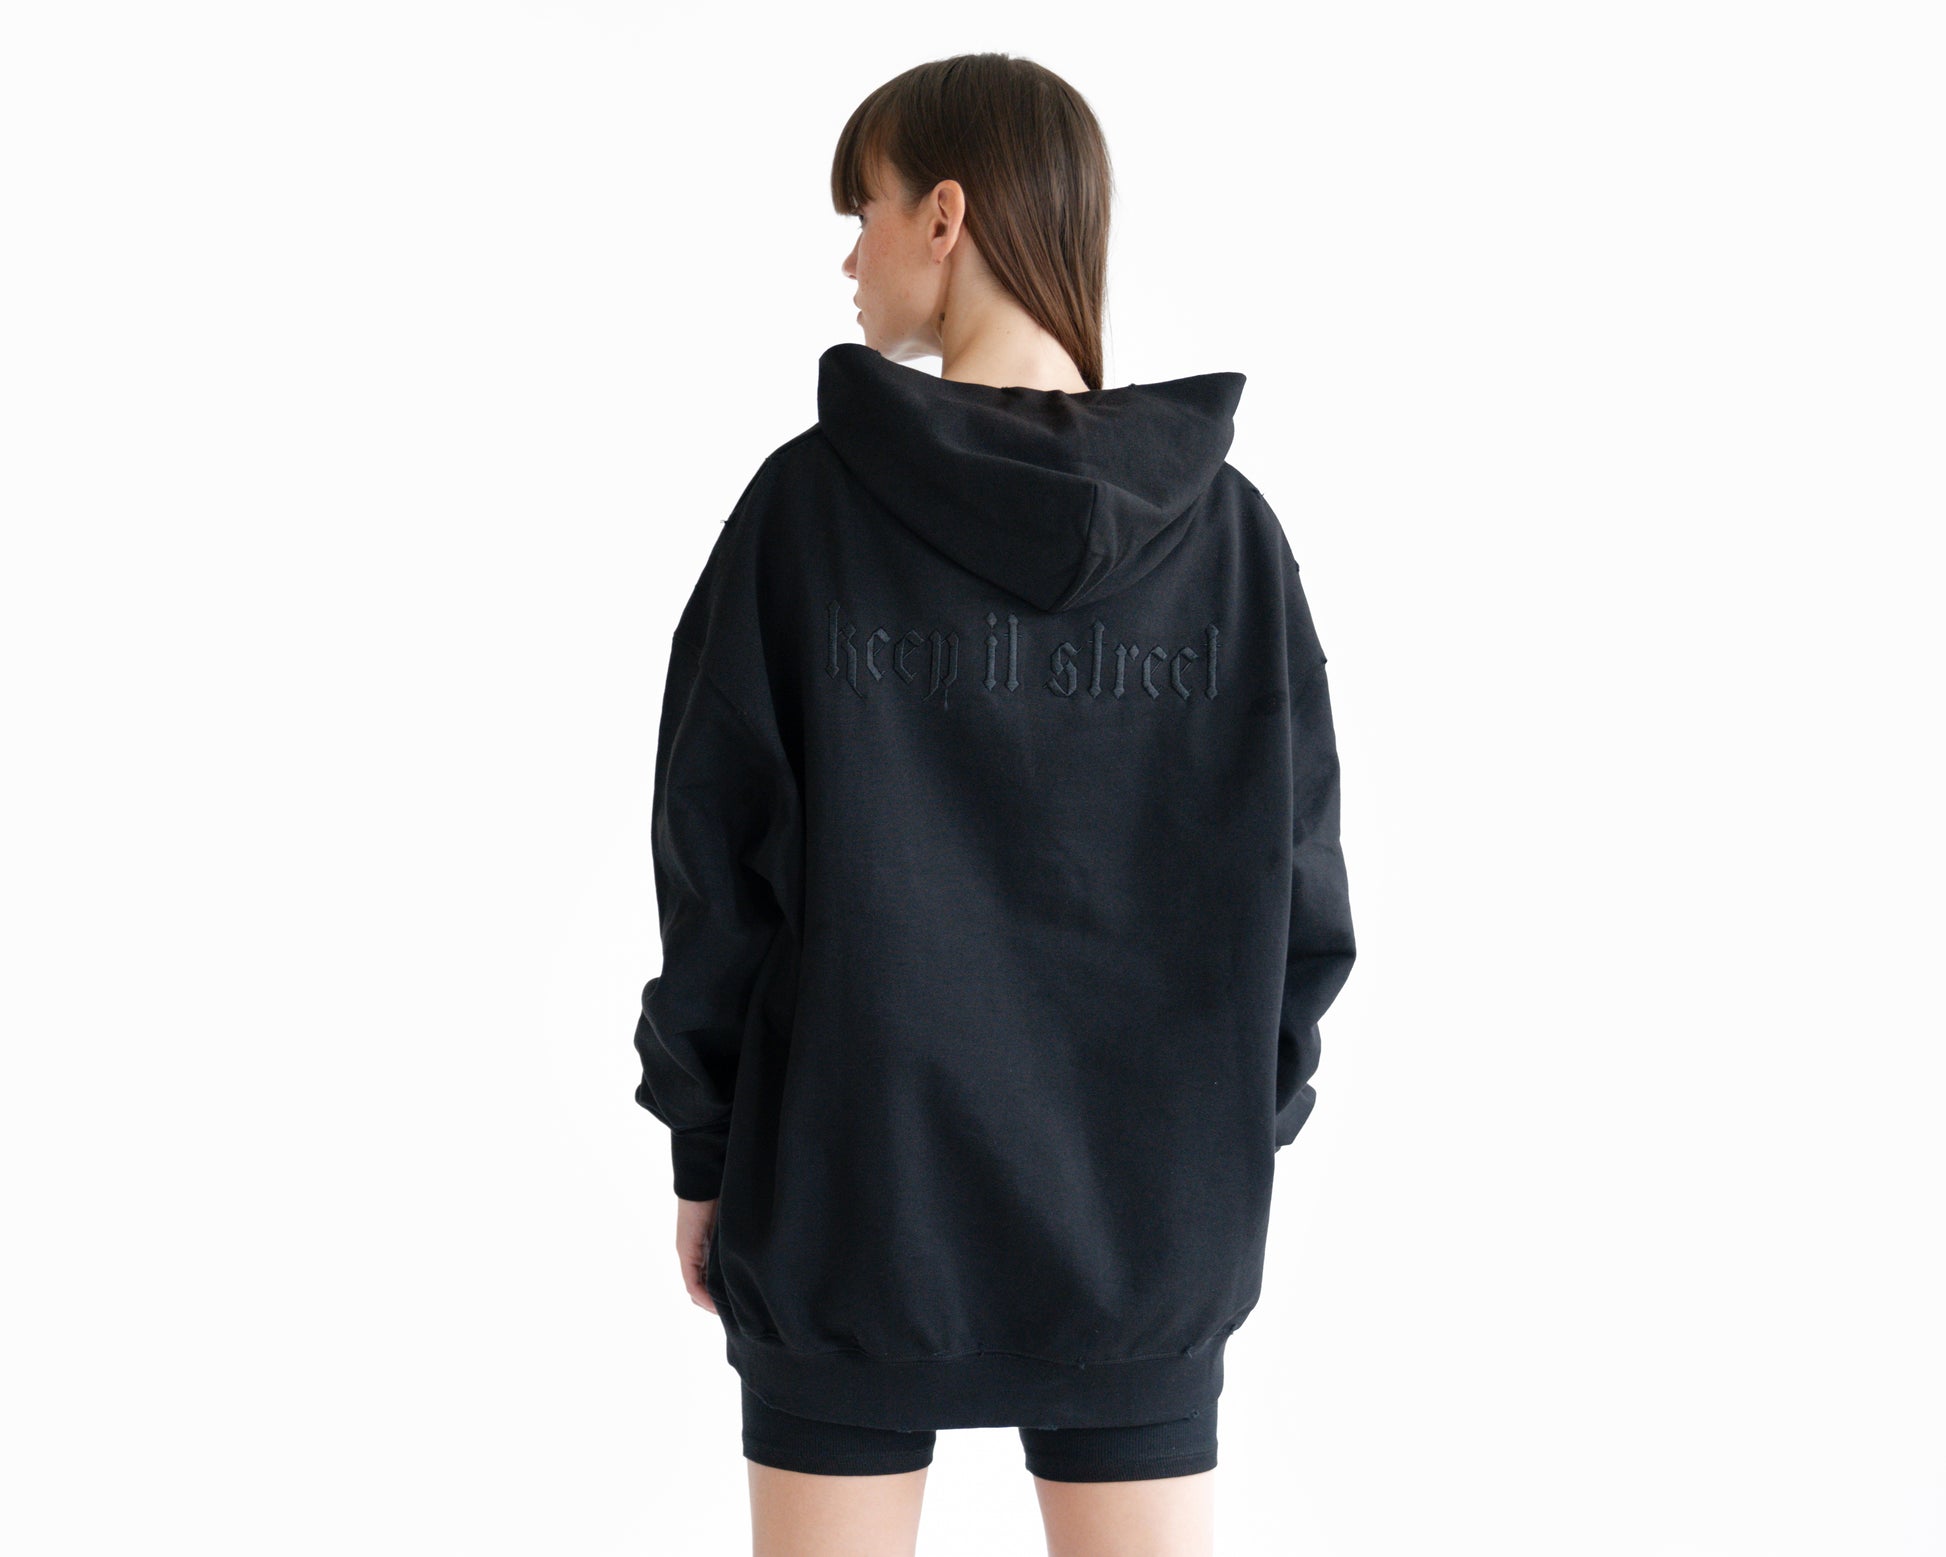 Hoodie black with "keepitstreet" embroidery on the back